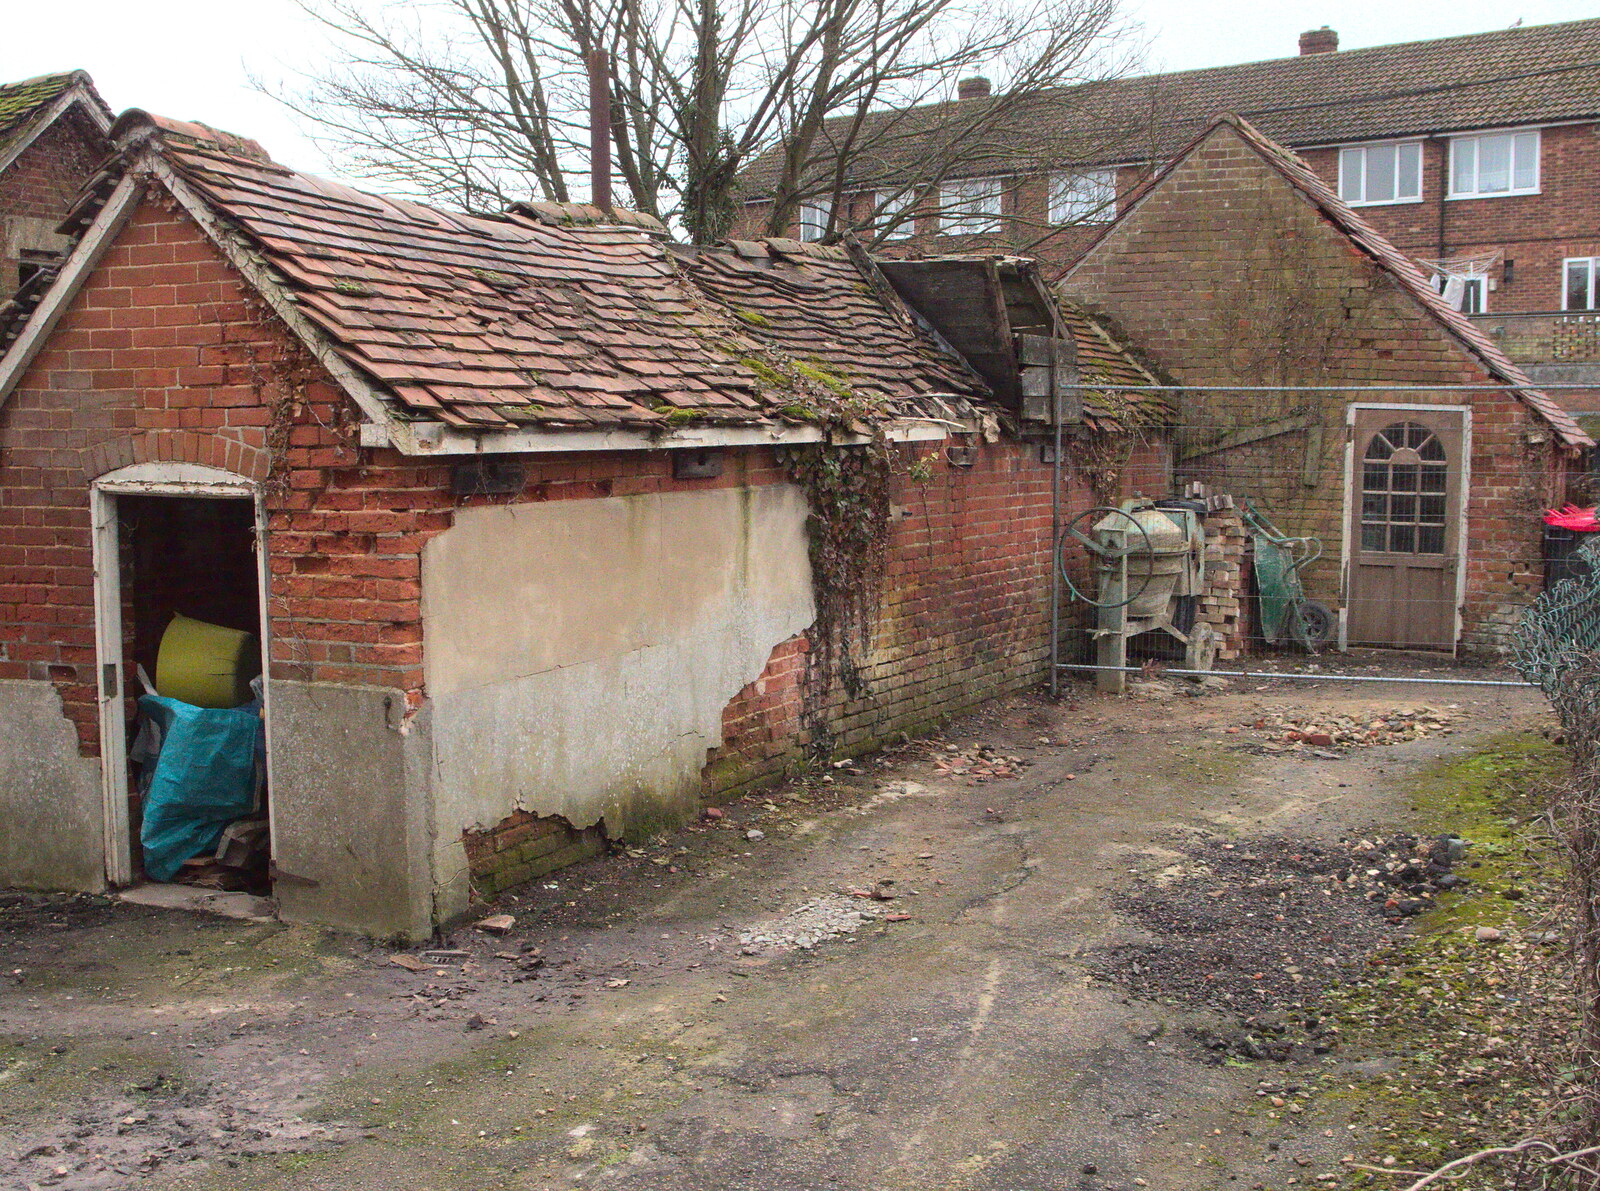 Derelict outbuildings near Mavery House from Closing Down: A Late January Miscellany, Diss, Norfolk - 31st January 2015